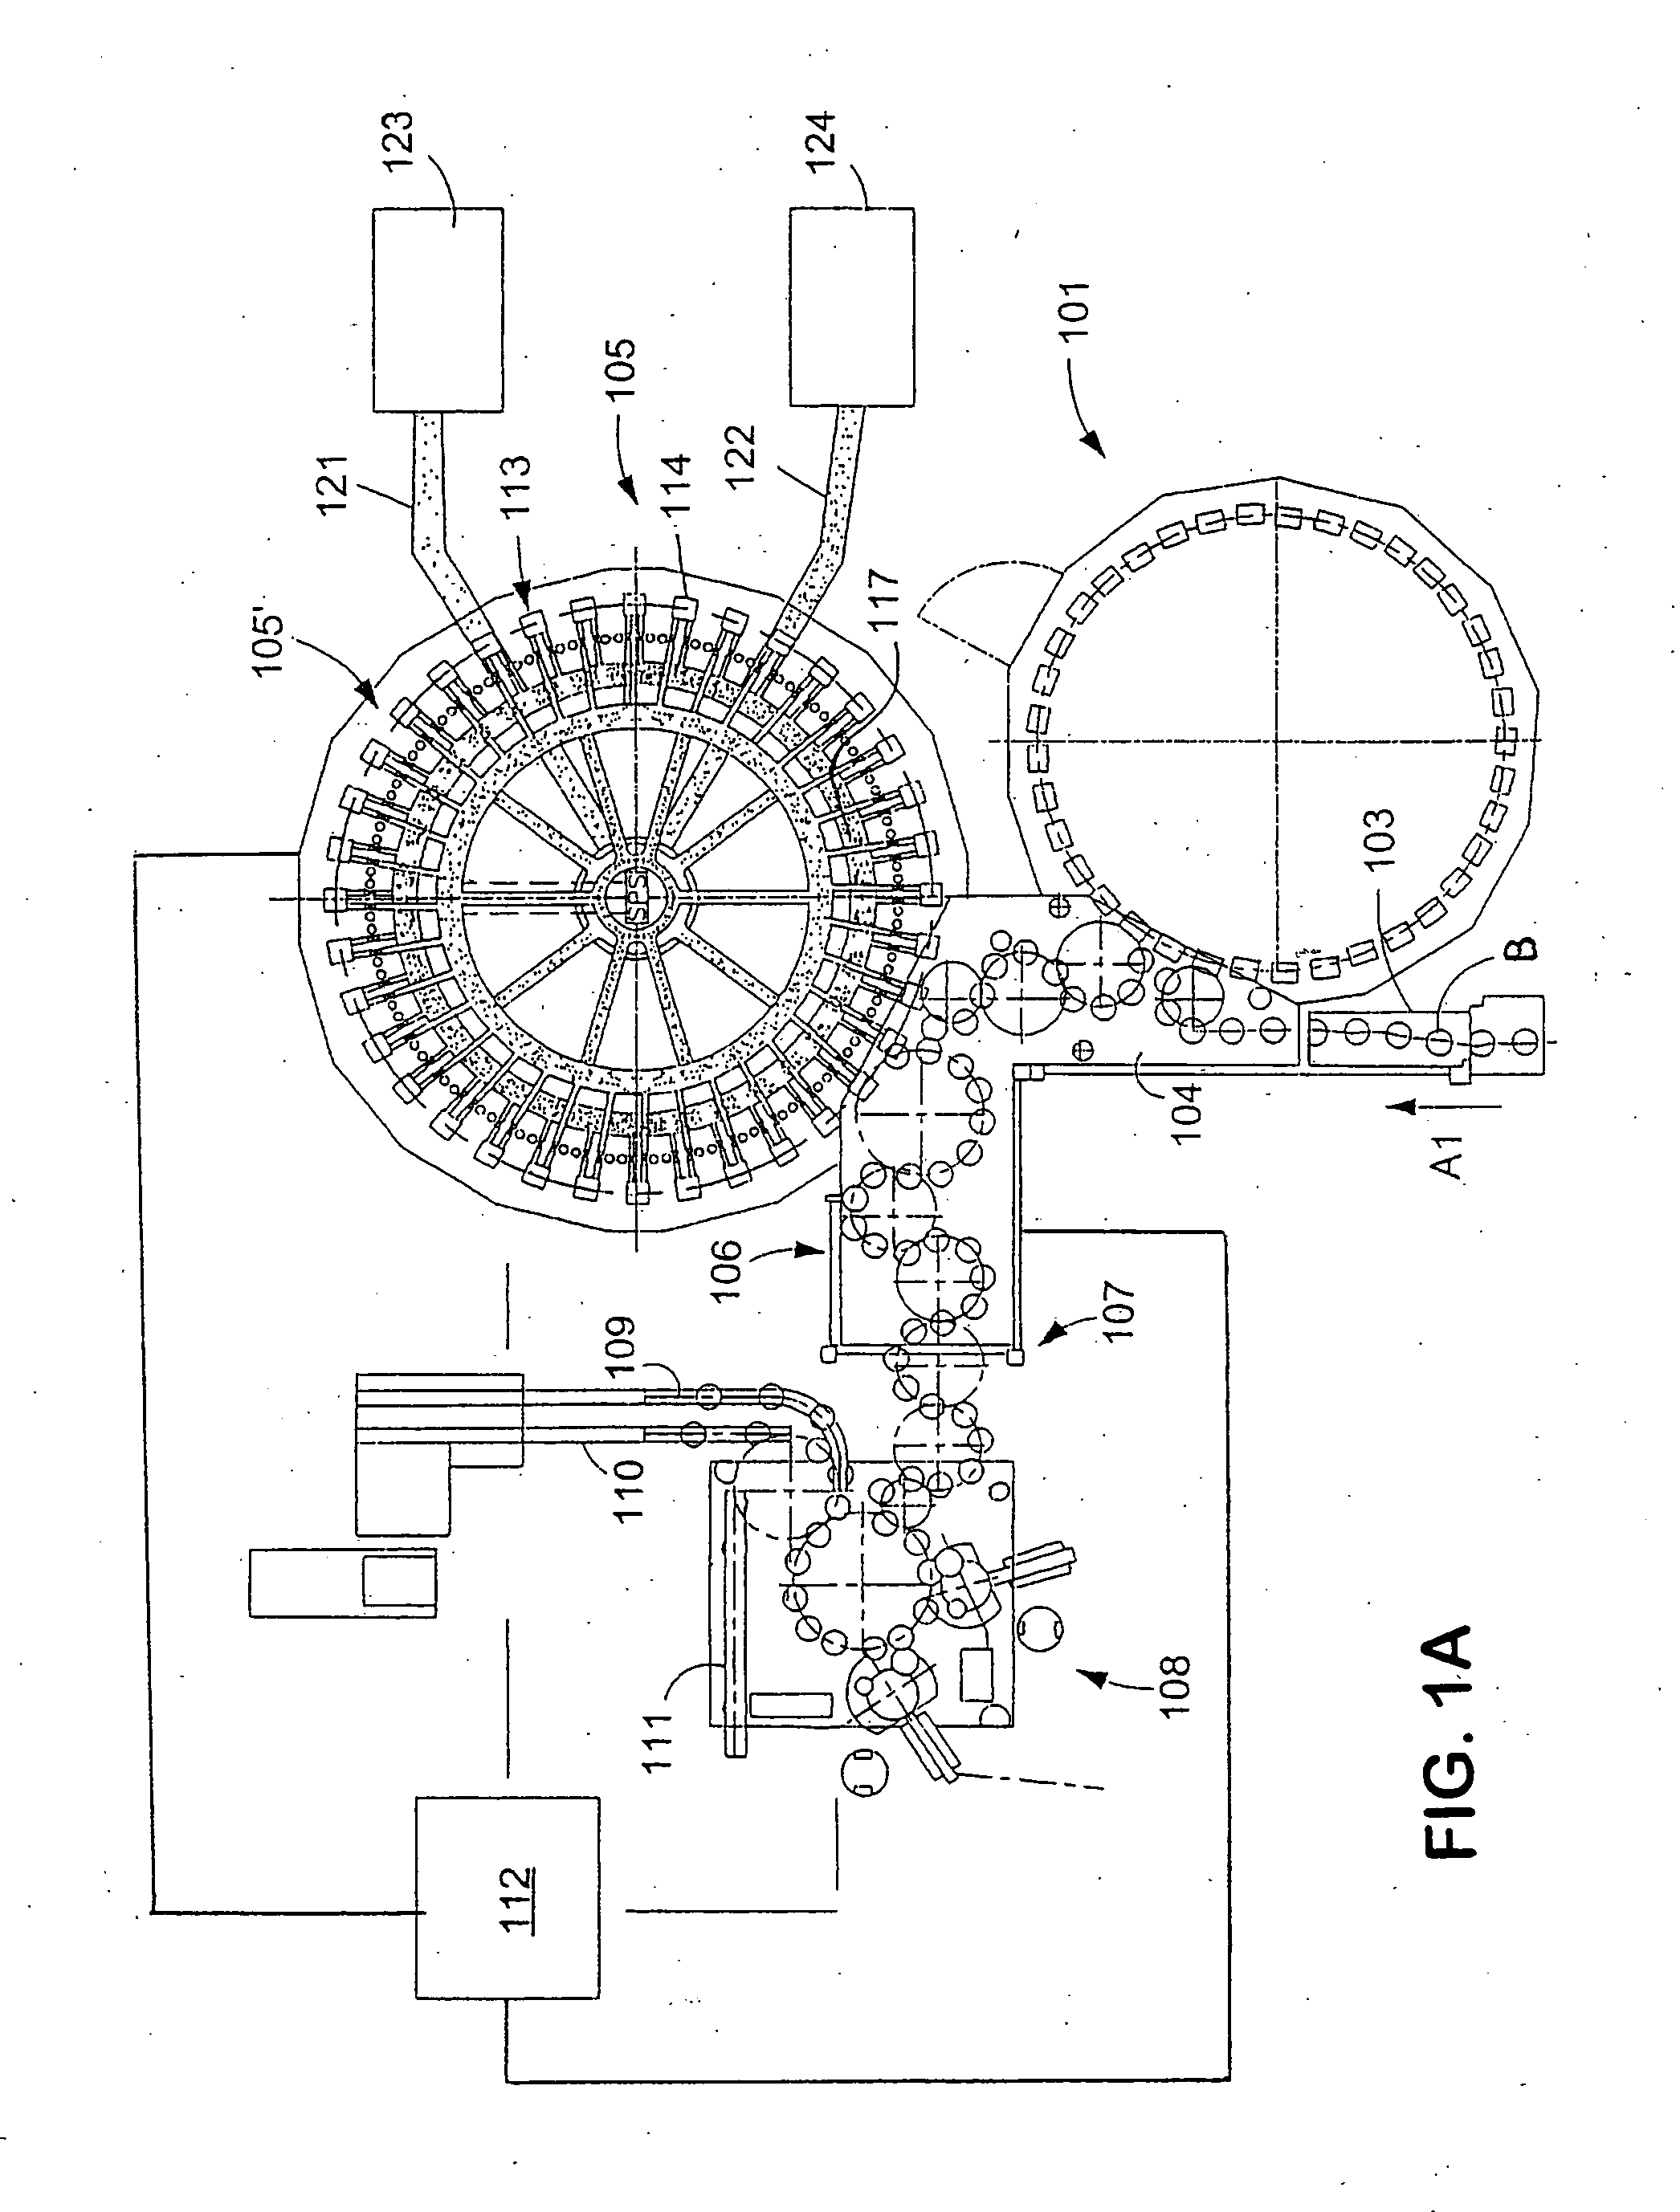 Method of operating a beverage bottling plant with a beverage filling machine for filling beverage bottles, and a method and apparatus for monitoring beverage bottle or container handing machines in the beverage bottling plant